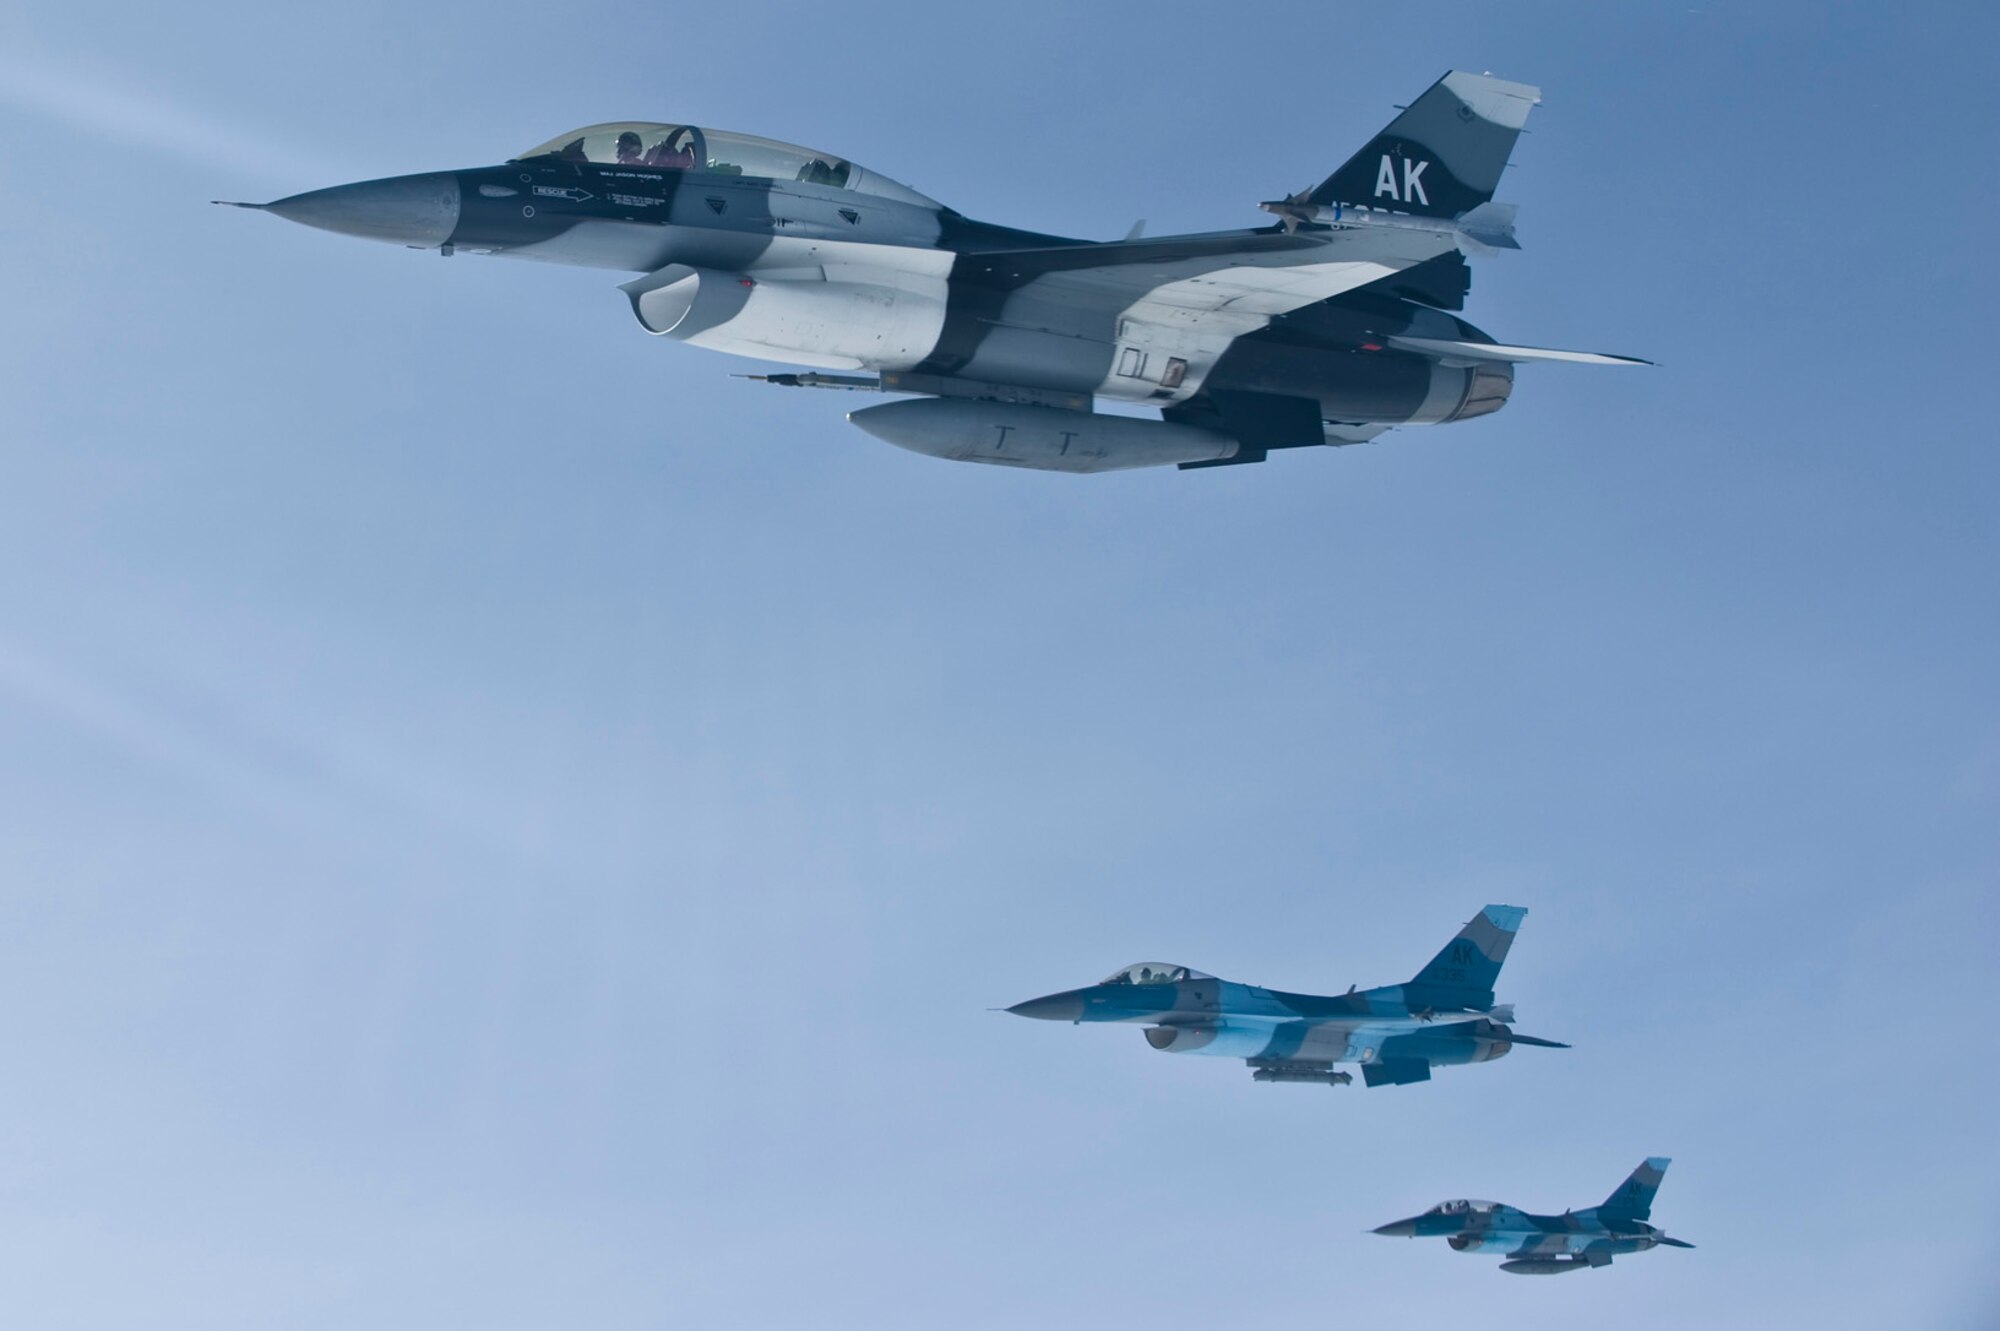 Three F-16 Aggressors fly in formation after being refueled June 10, 2008, at Eielson Air Force Base, Alaska during RED FLAG-Alaska 08-3. The Pacific Alaskan Range Complex provides 67,000 square miles of airspace, one conventional bombing range and two tactical bombing ranges containing more than 400 different types of targets and more than 30 threat simulators, both manned and unmanned. These aircraft are assigned to the 18th Aggressor Squadron. (U.S. Air Force Photo/Airman 1st Class Jonathan Snyder)